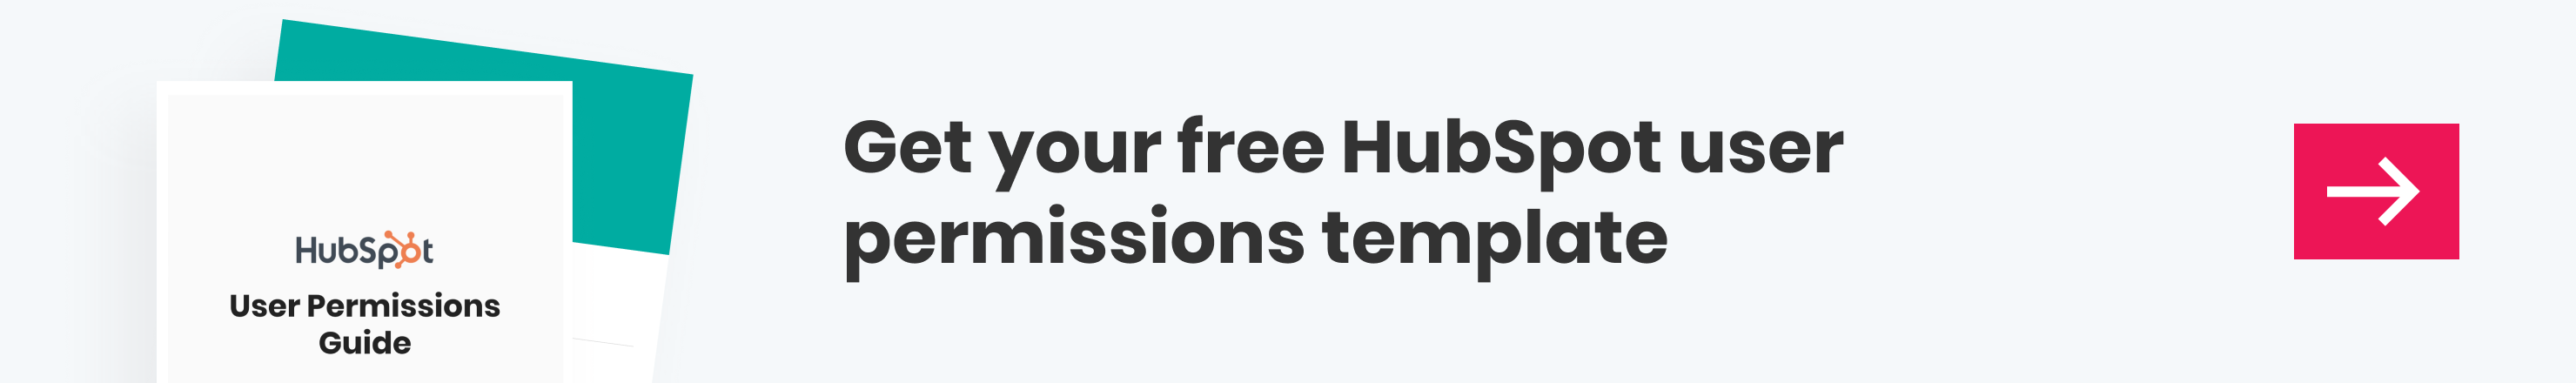 HubSpot user permissions guide 